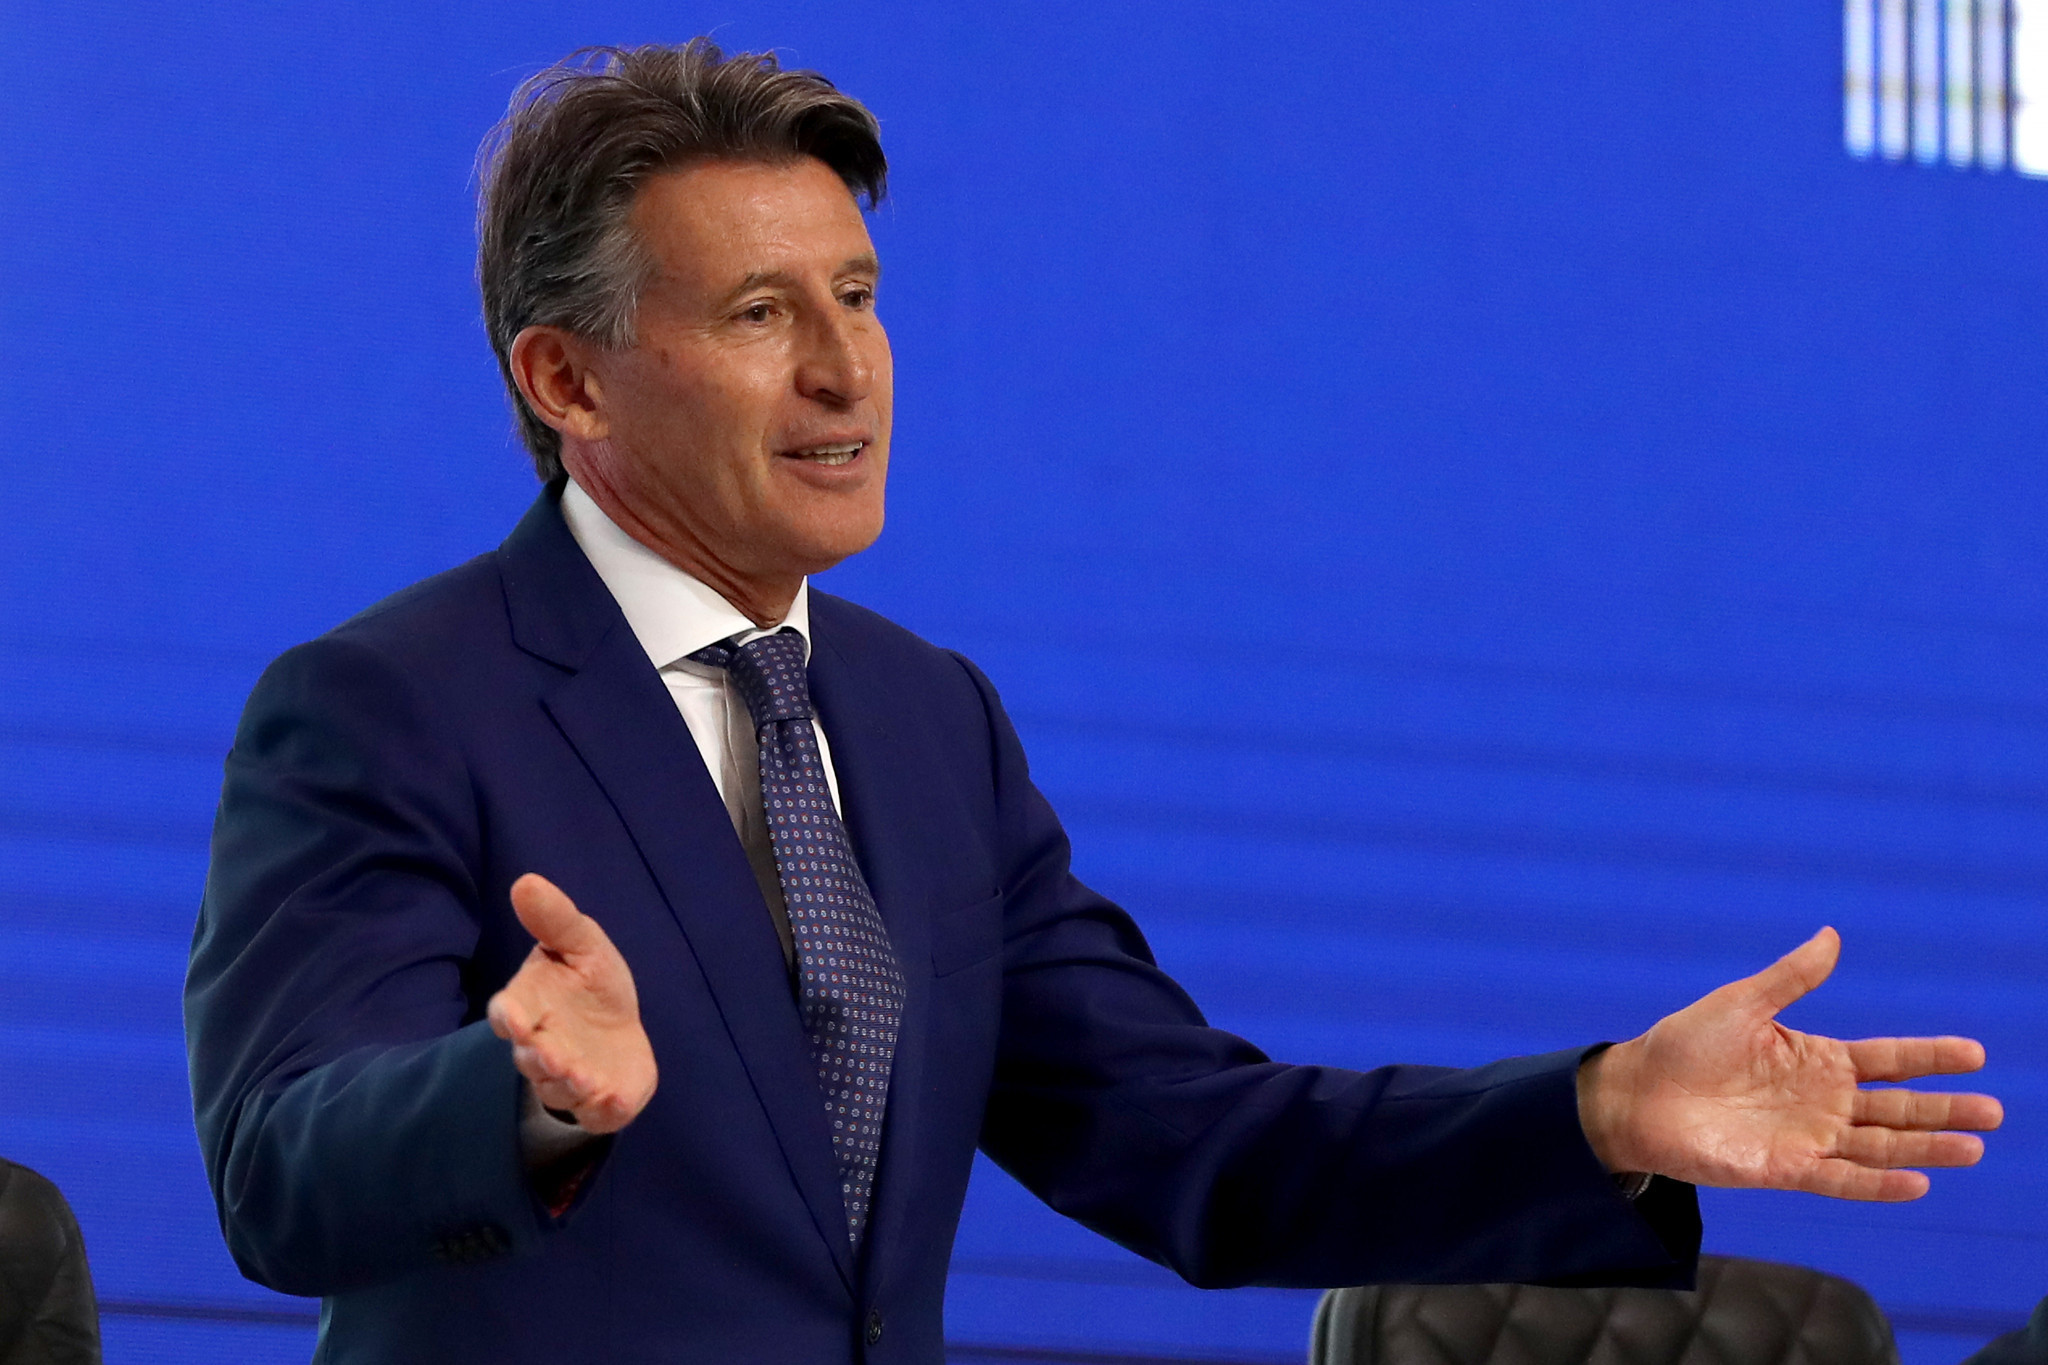 World Athletics President Seb Coe has confirmed Russian athletes will be able to travel to the Eugene 2022 World Athletics Championships ©Getty Images